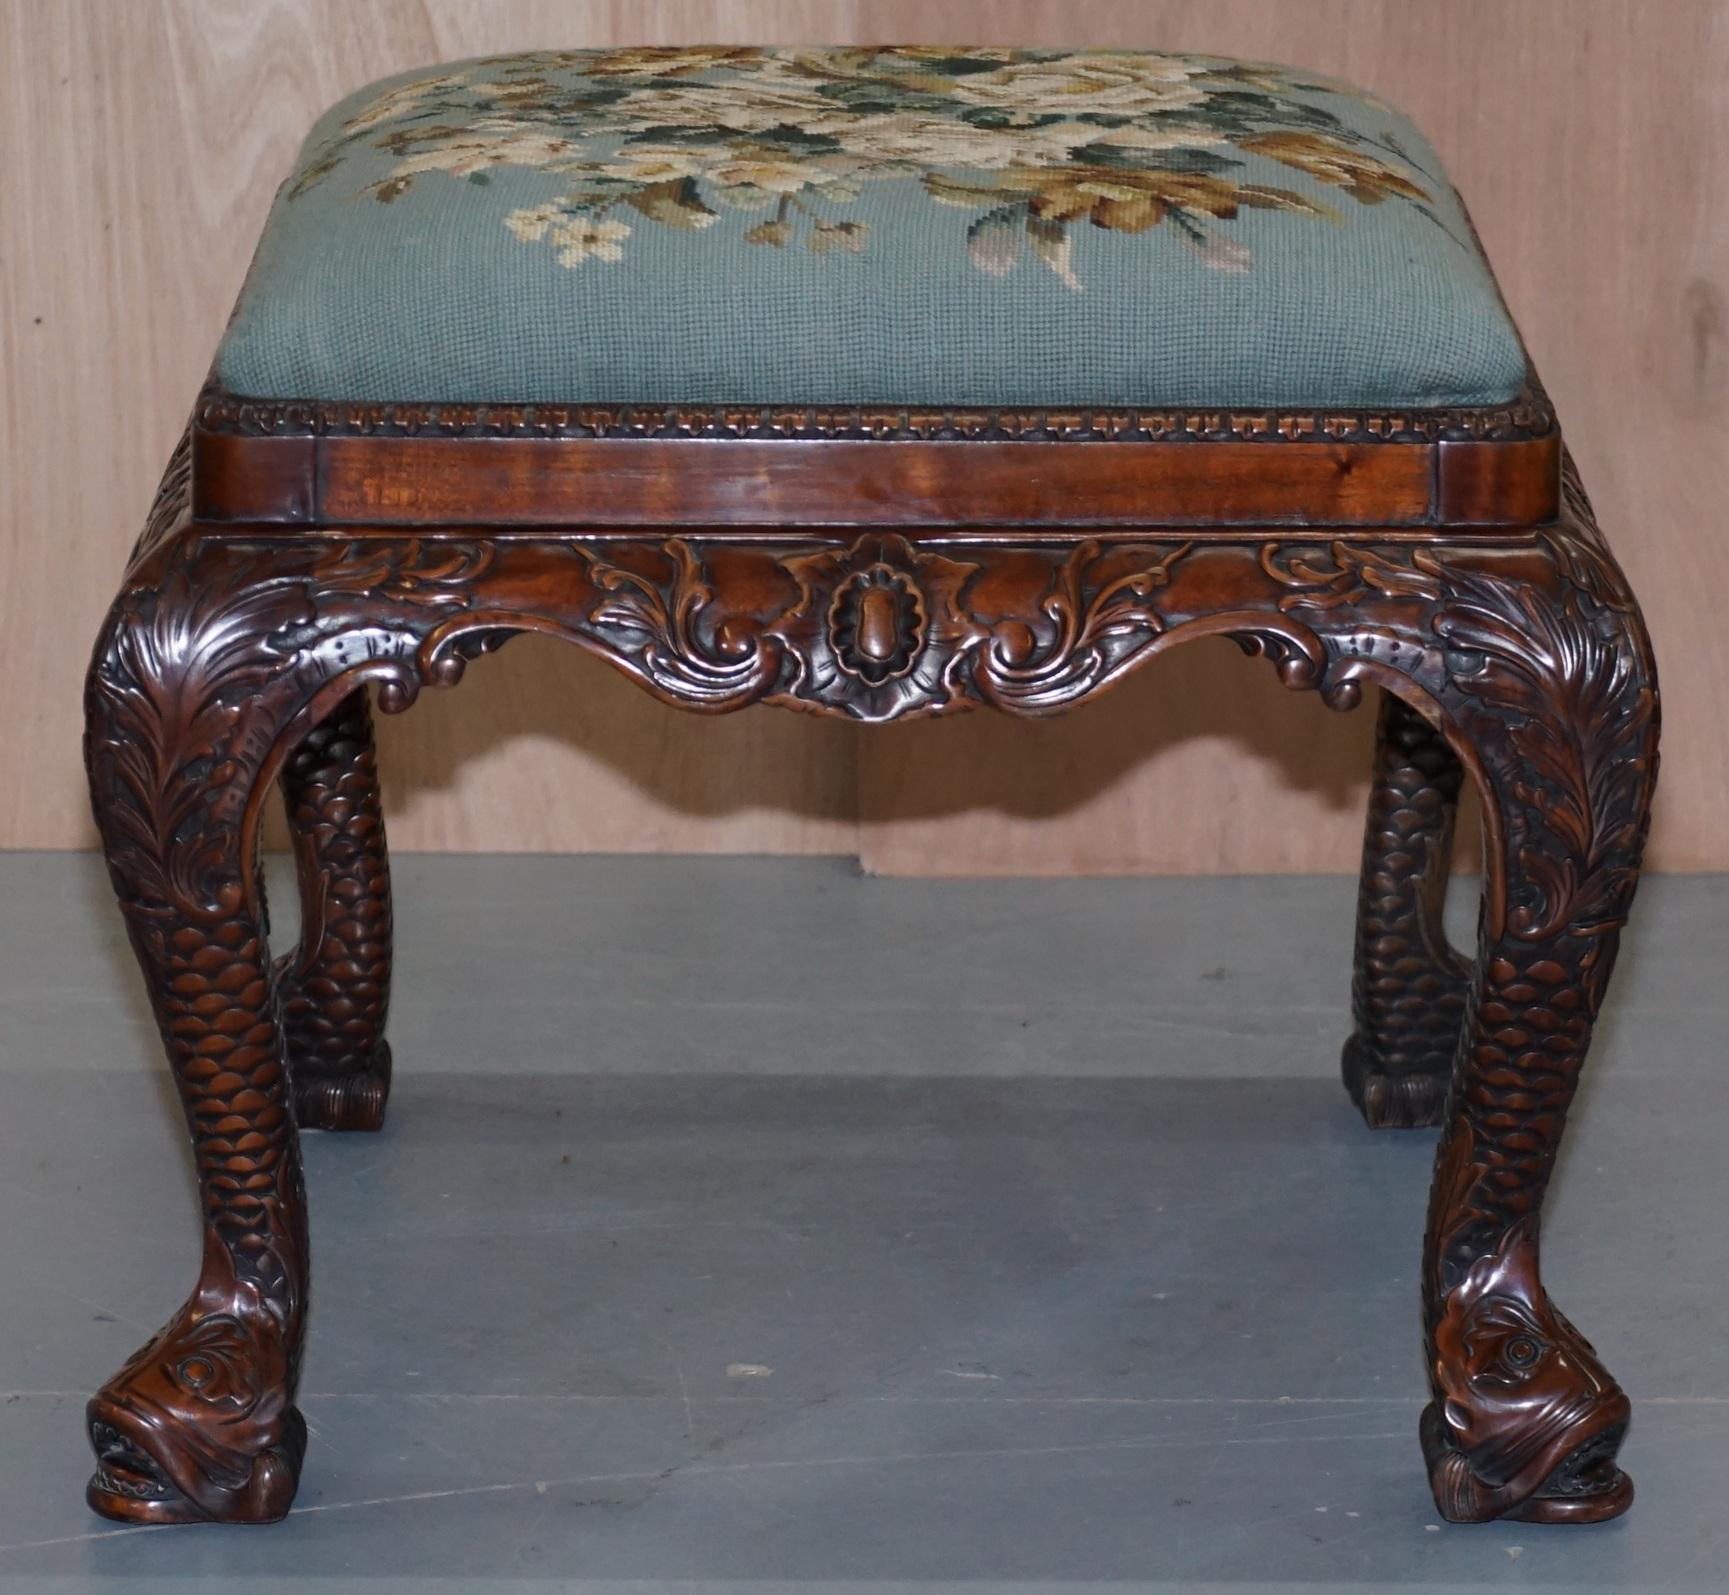 We are delighted to offer for sale this lovely hand carved George II style mahogany stool with original floral embroidered upholstery

A very good looking well made and decorative piece, this is like art furniture to me, you can place it in any